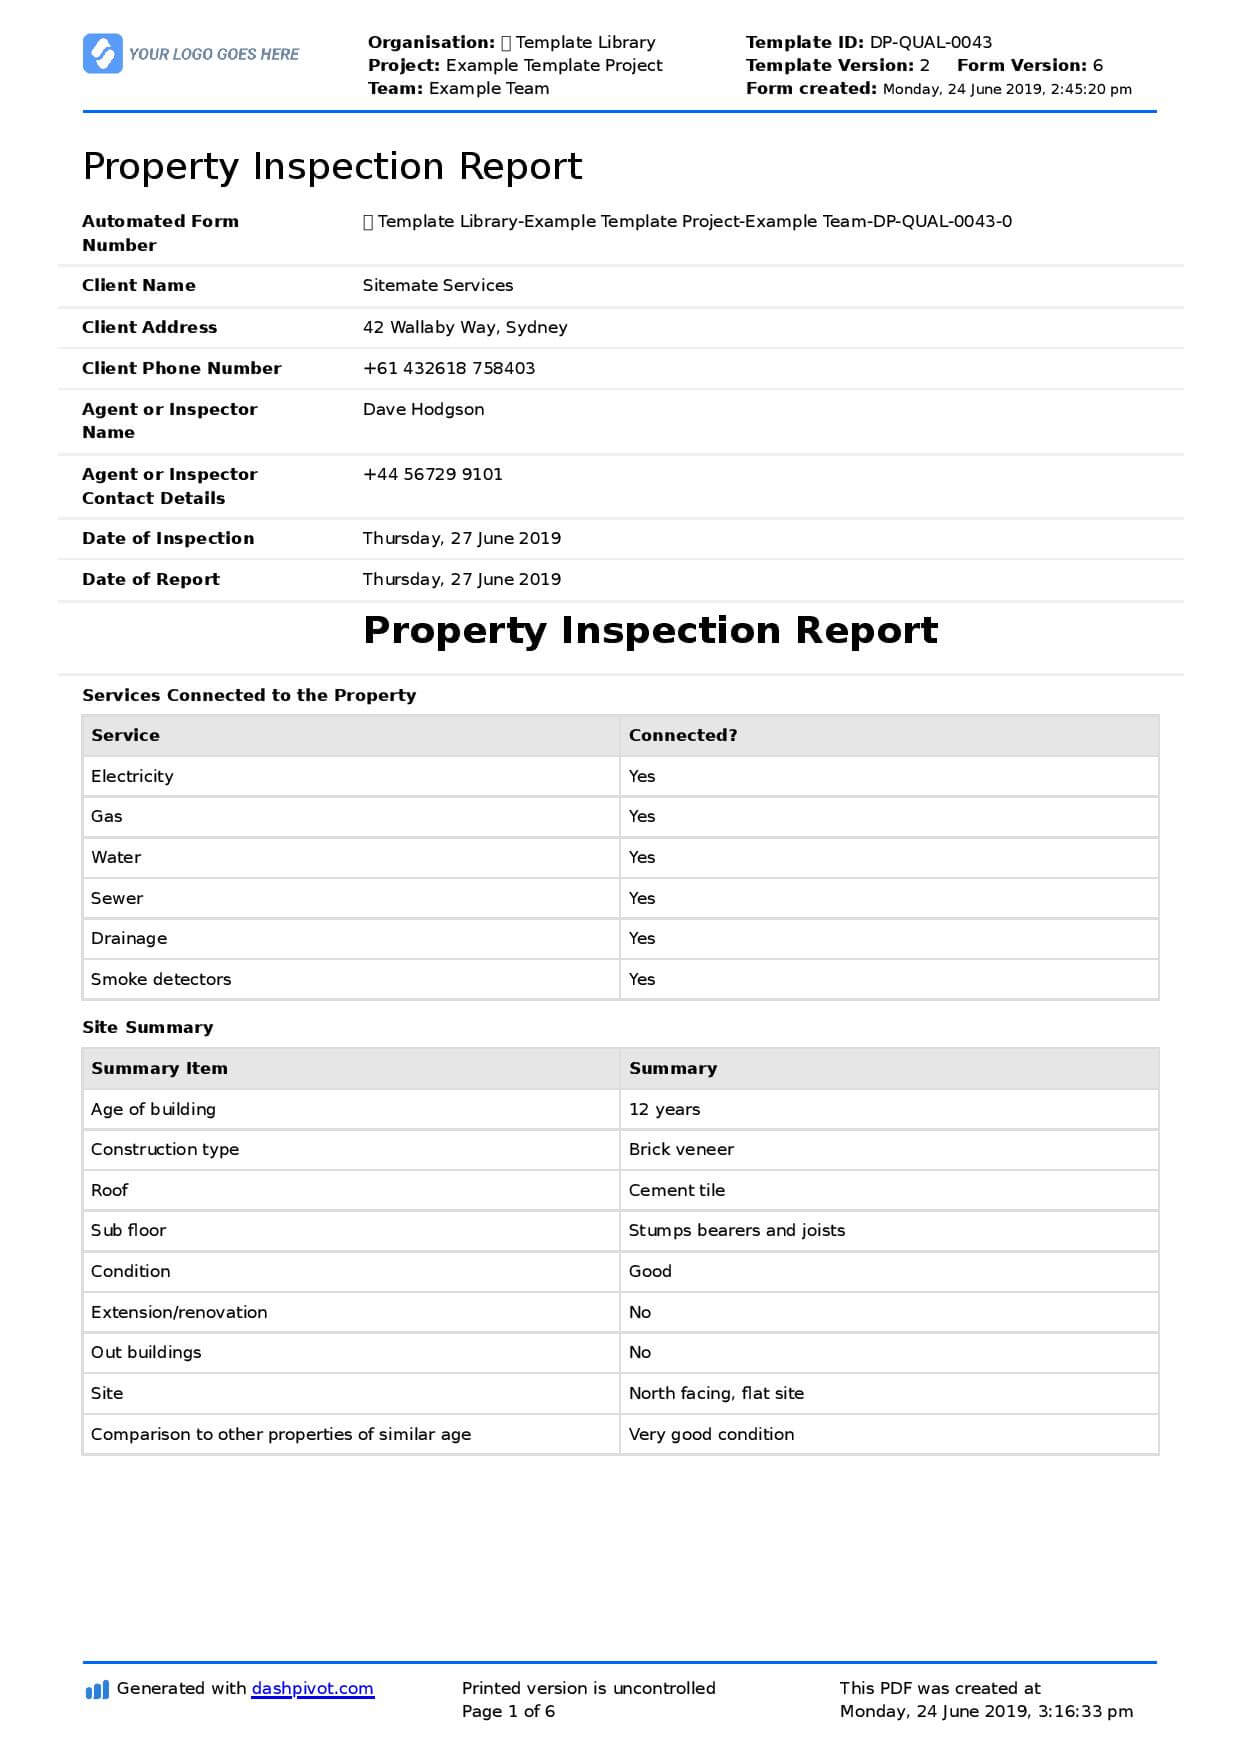 Property Inspection Report Template (Free And Customisable) In Commercial Property Inspection Report Template